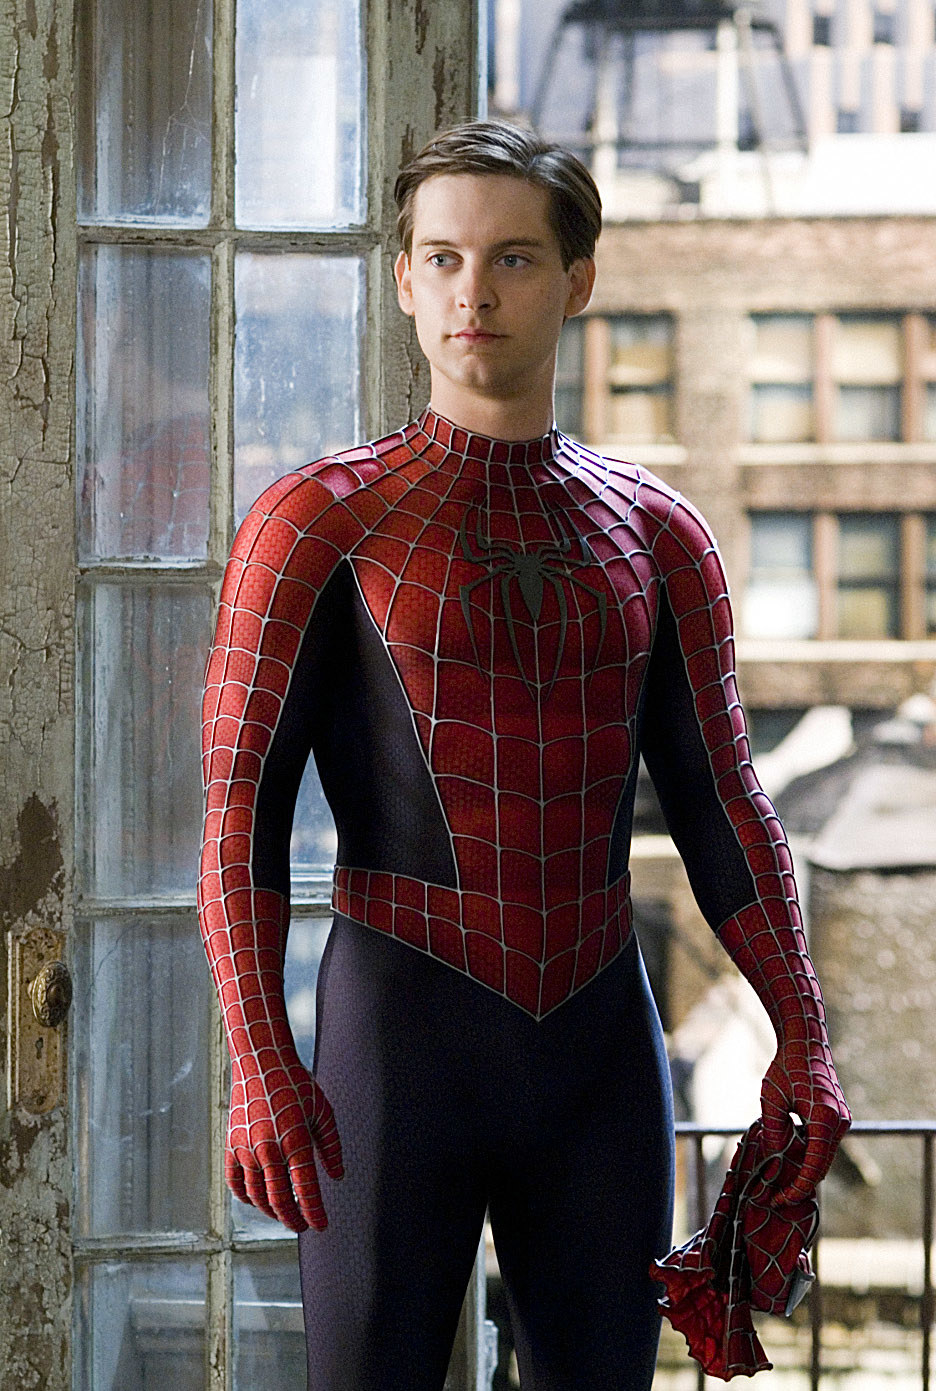 Peter stands in his Spidey suit, unmasked